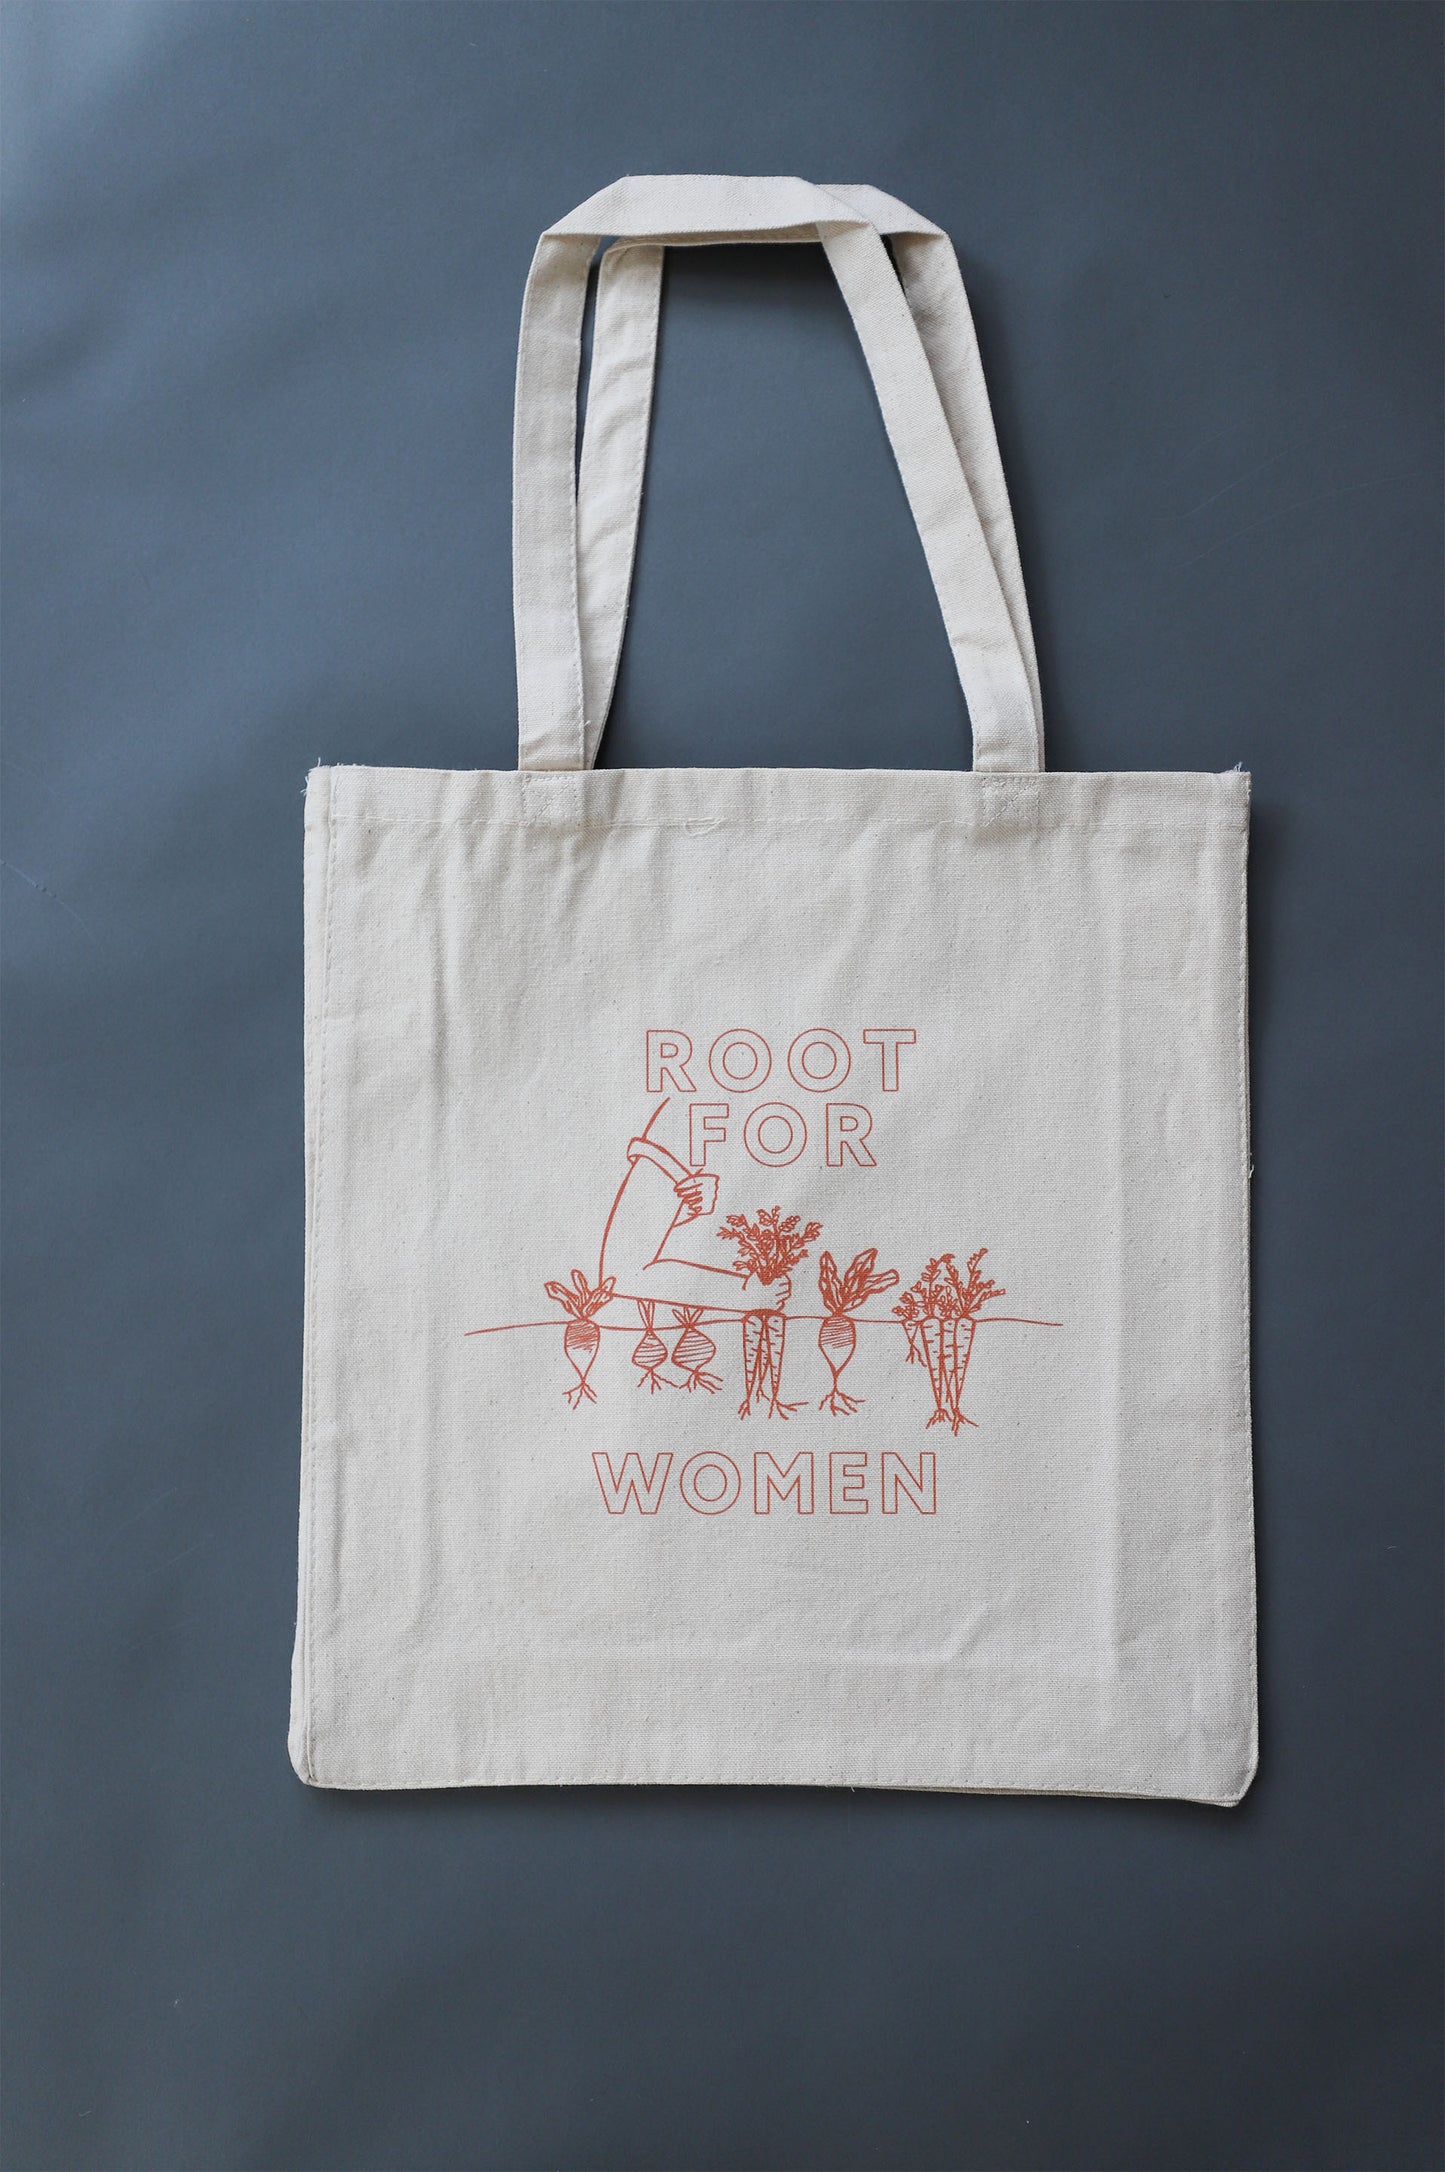 A canvas tote with red block letters reads "Root for Women" with a garden illustration 